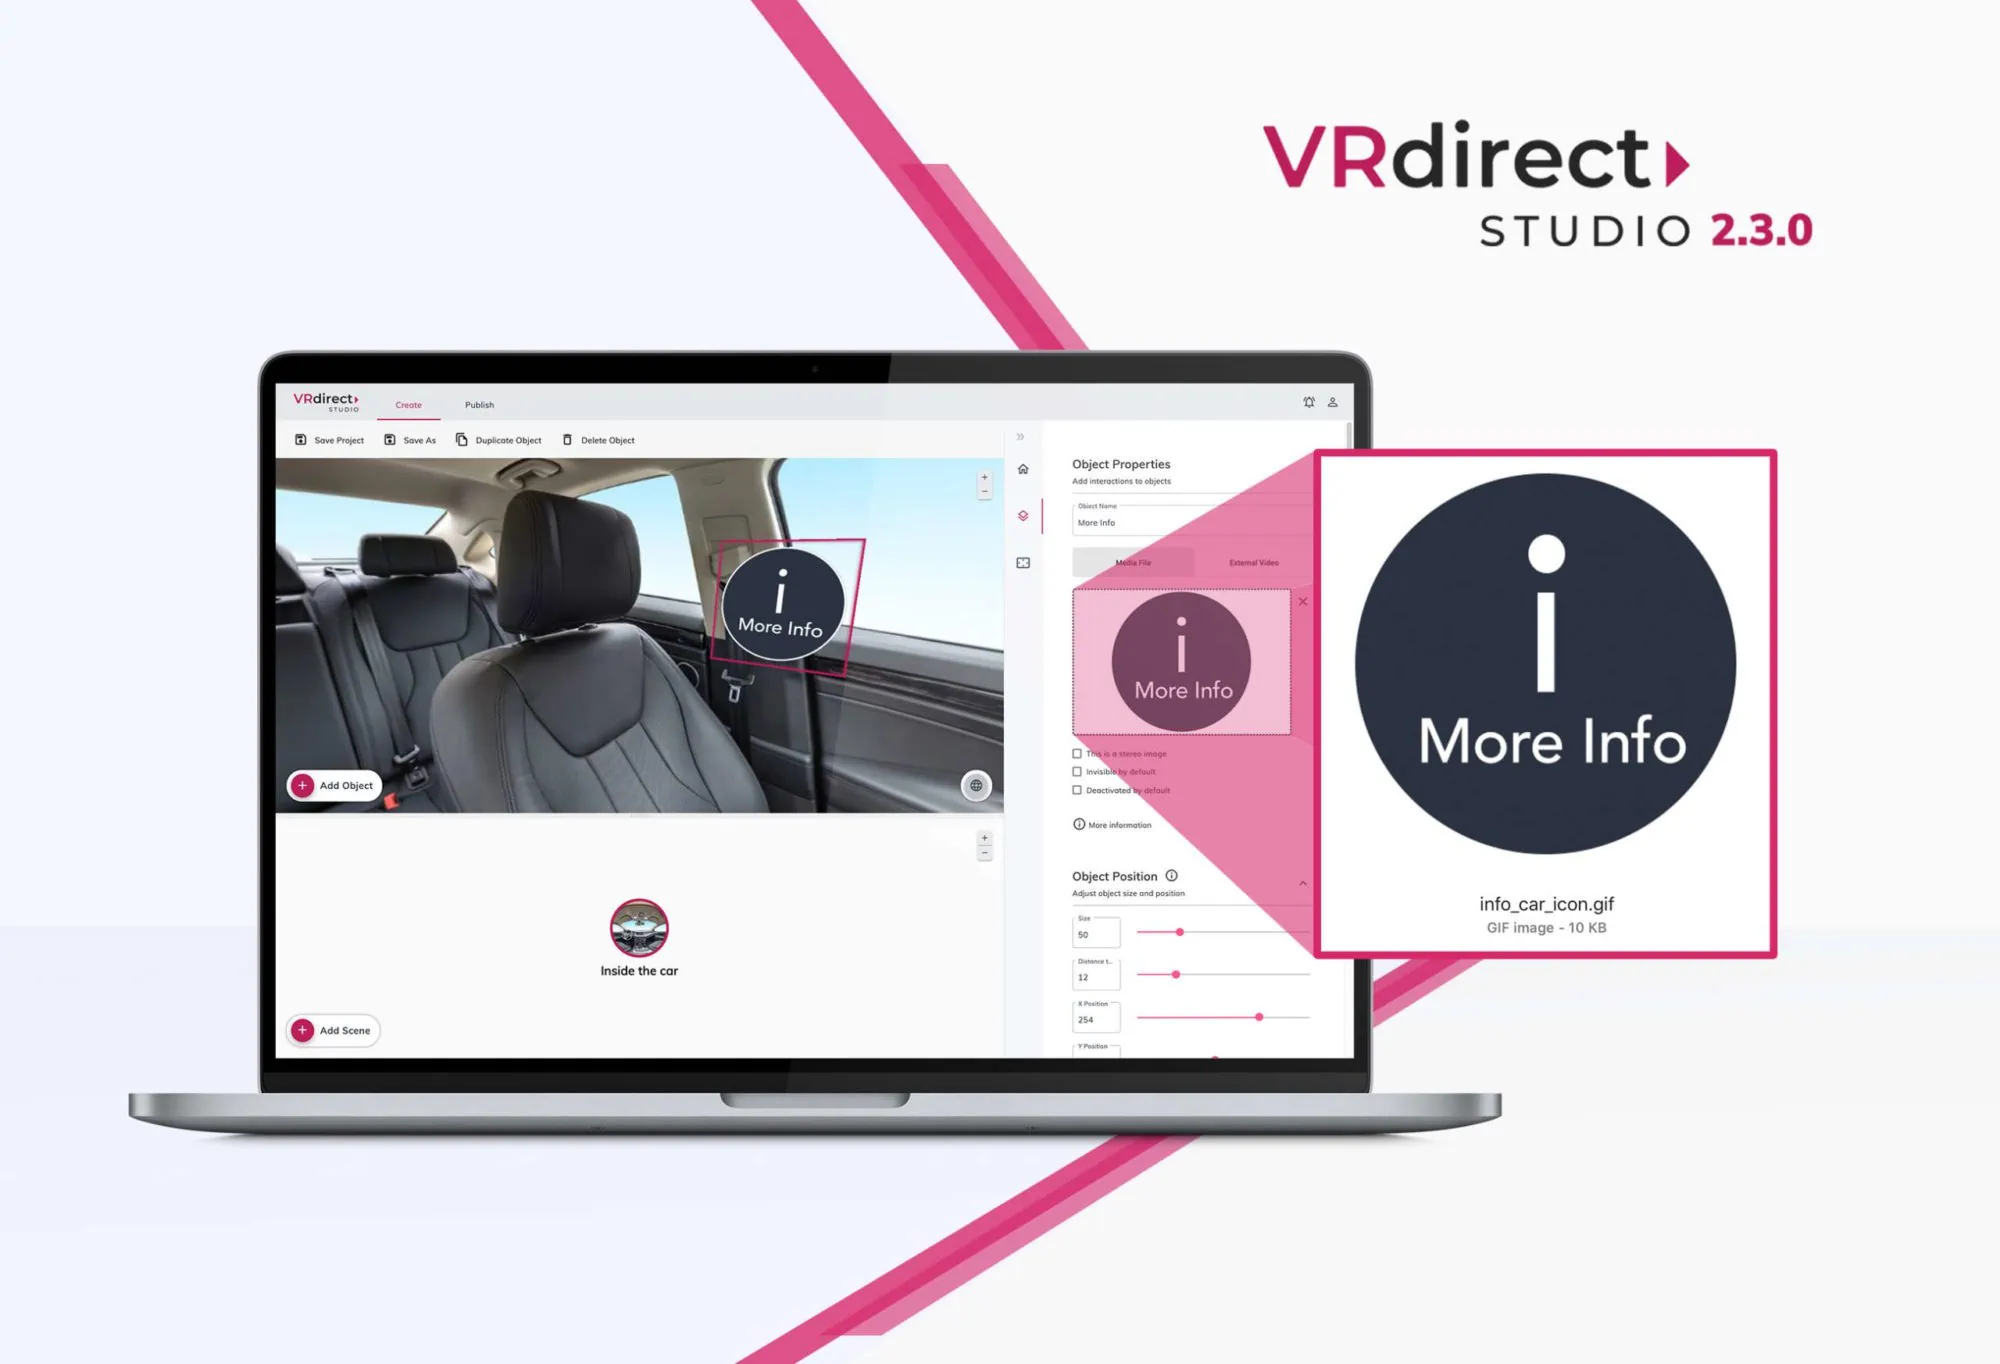 VRdirect 2.3.0 : New version enables widespread use of virtual reality in companies